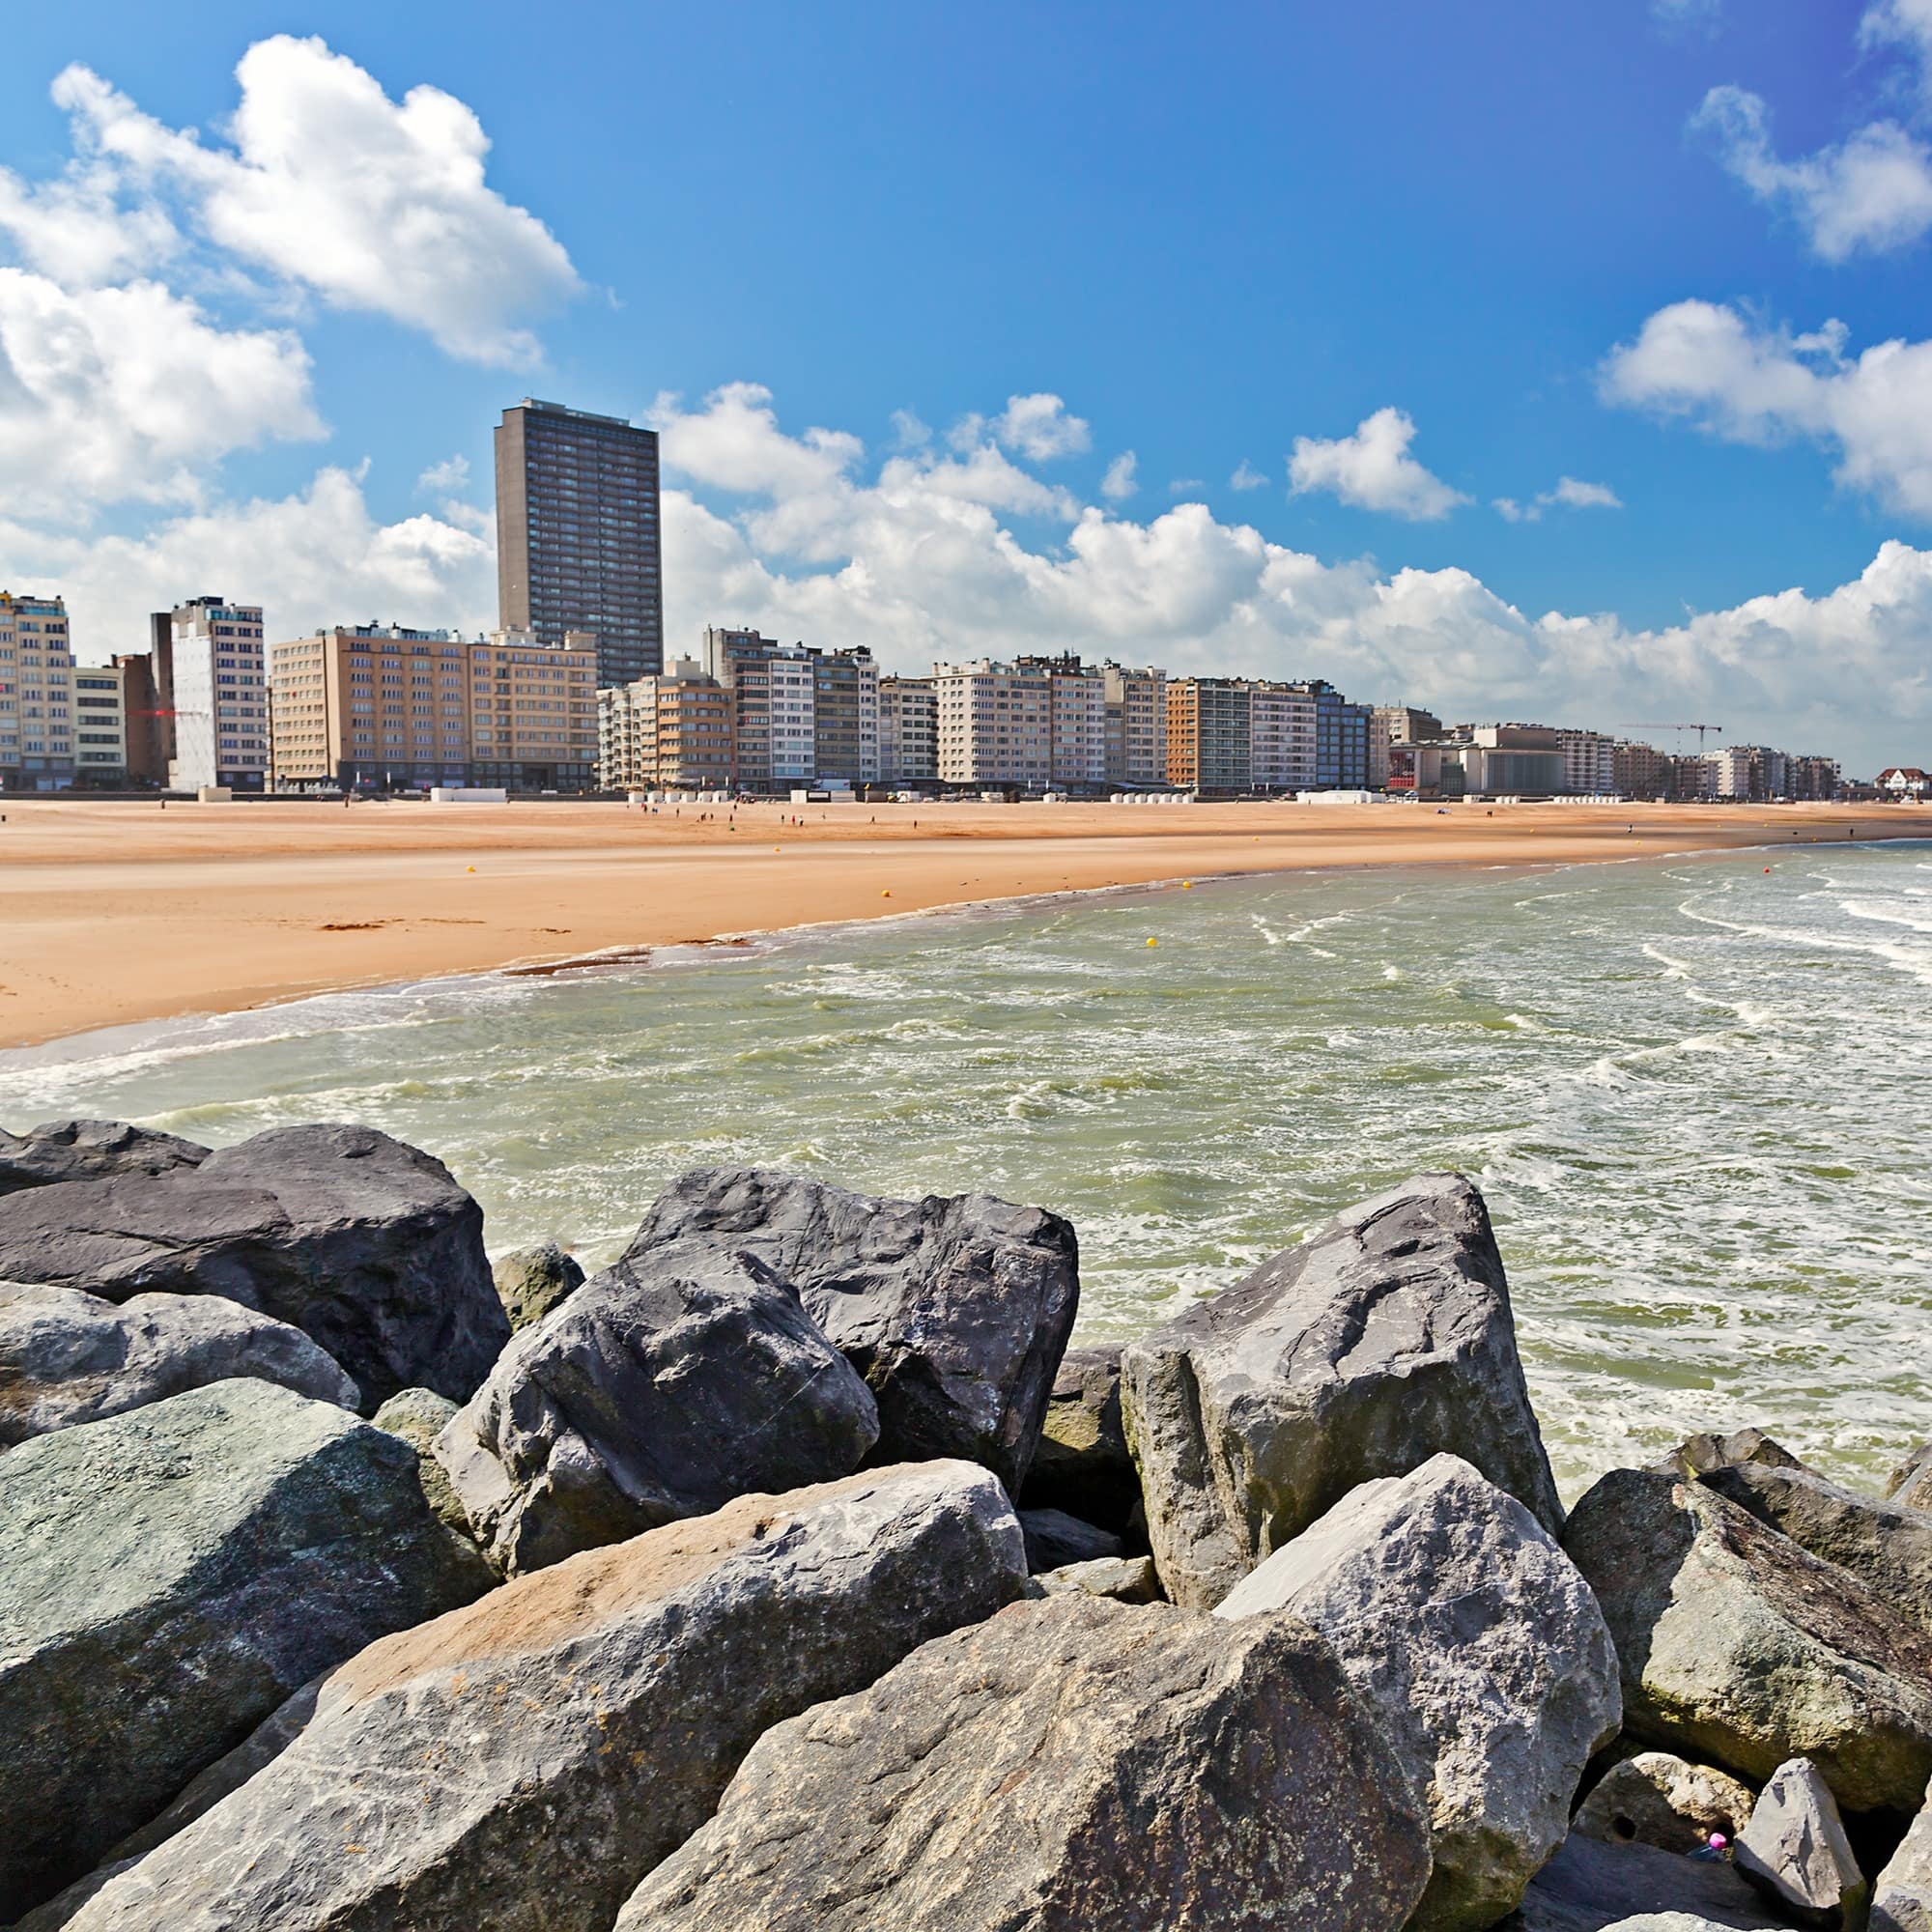 View from the sandy beach on the city. Summer day in Ostende, Belgium